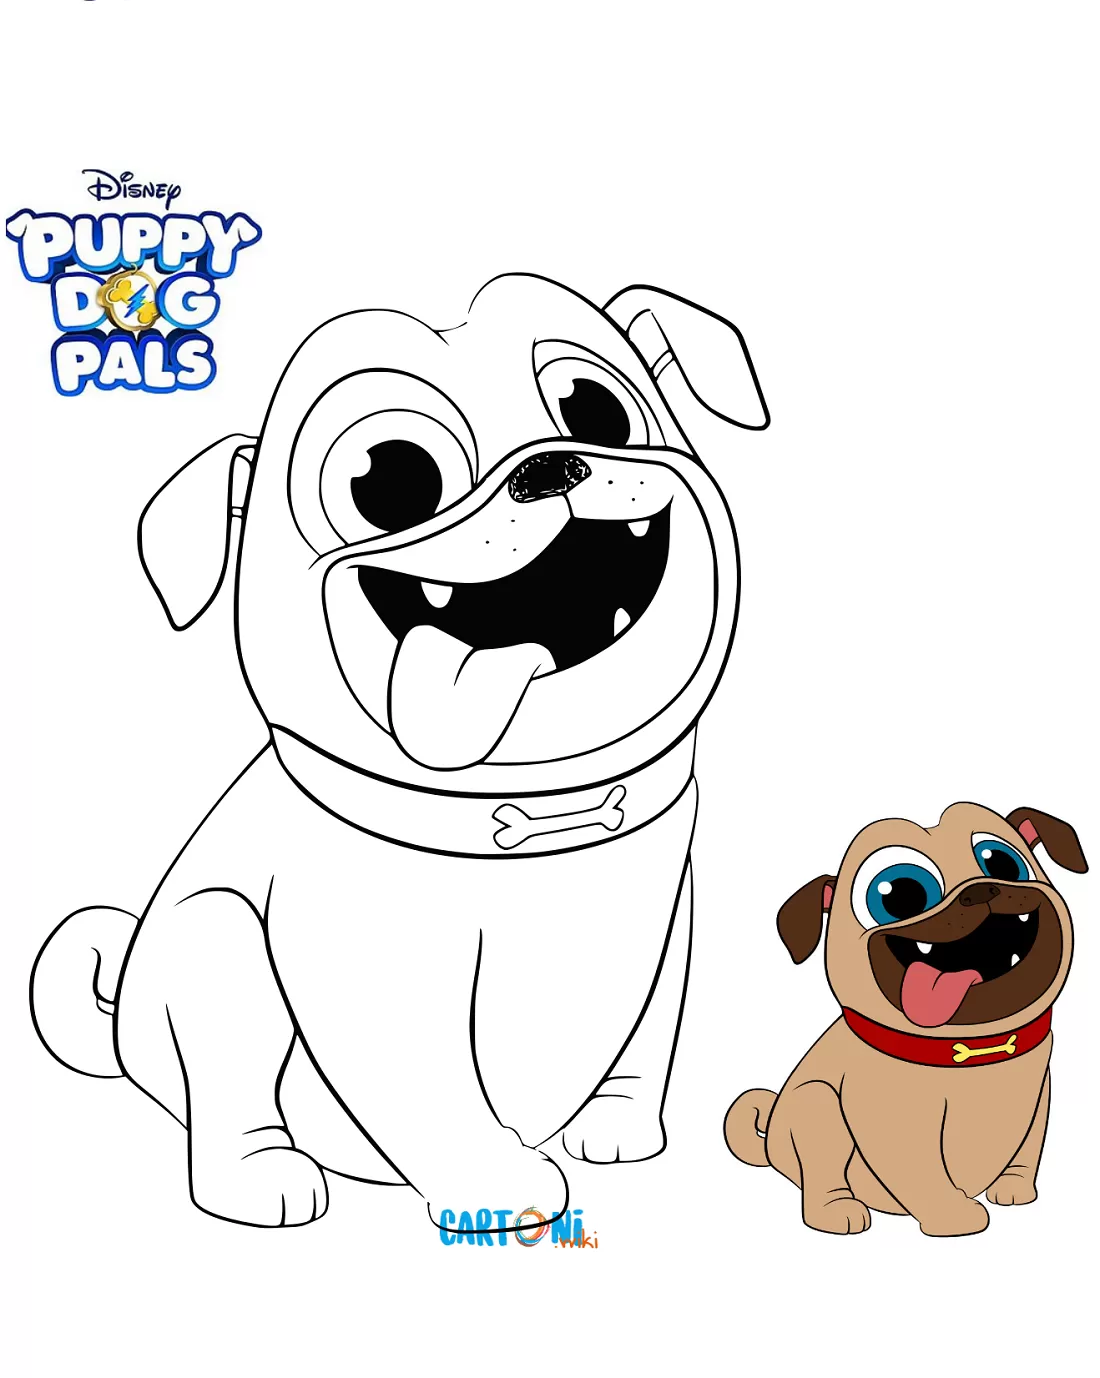 Puppy dog pals - Colora Rolly